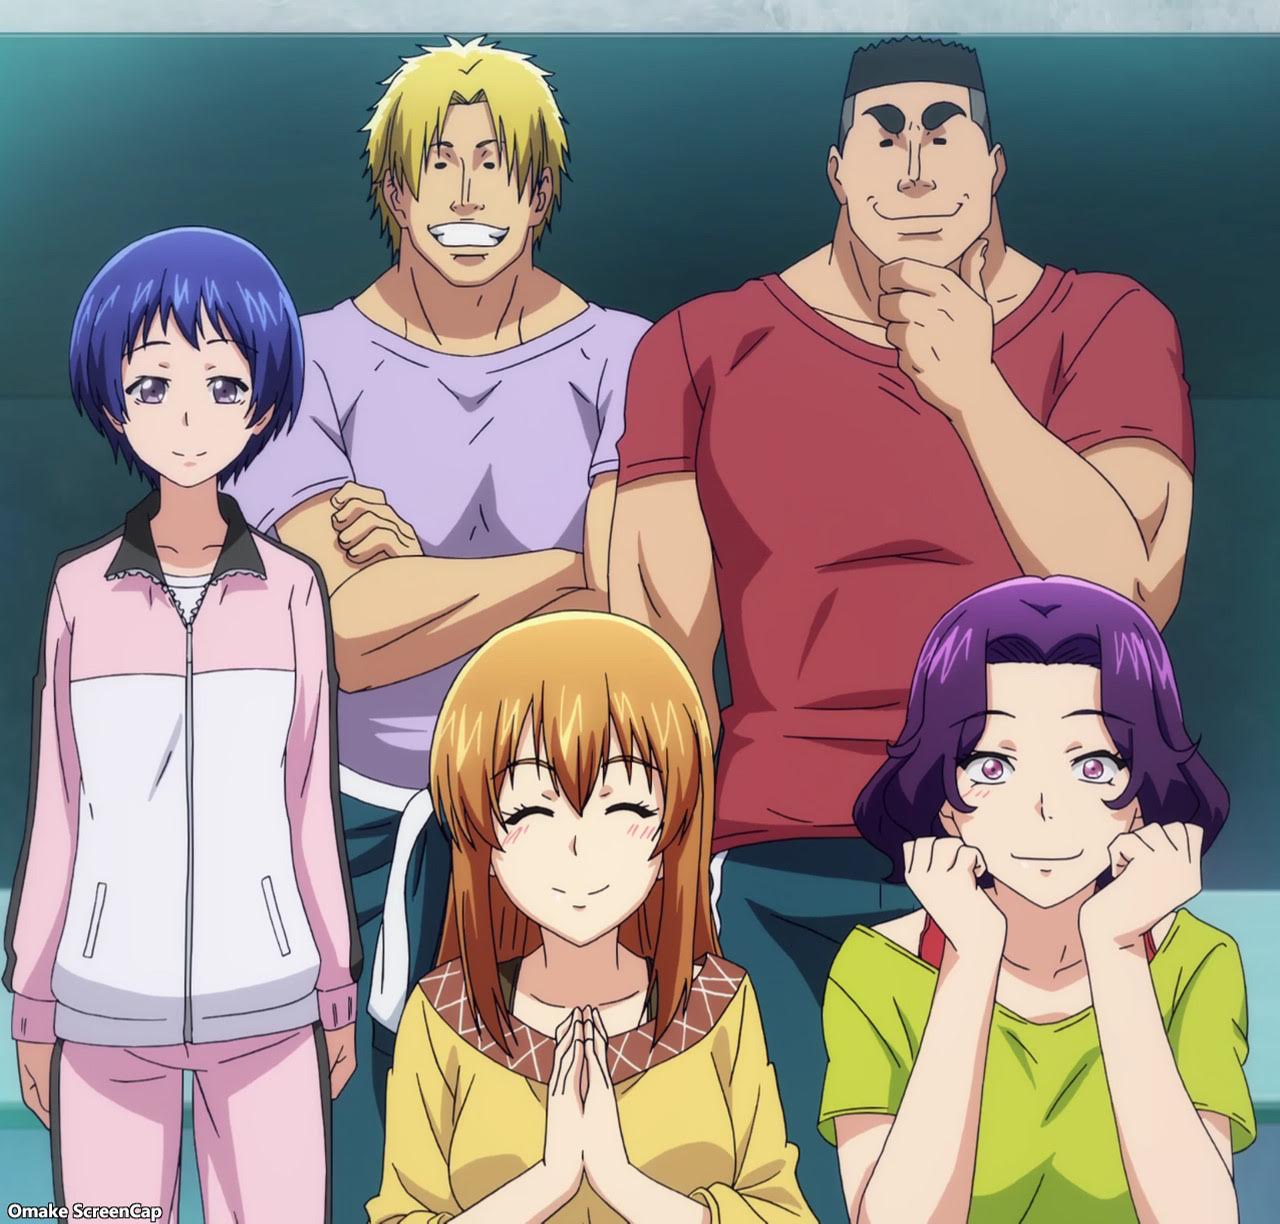 Joeschmo's Gears and Grounds: 10 Second Anime - Grand Blue - Episode 1